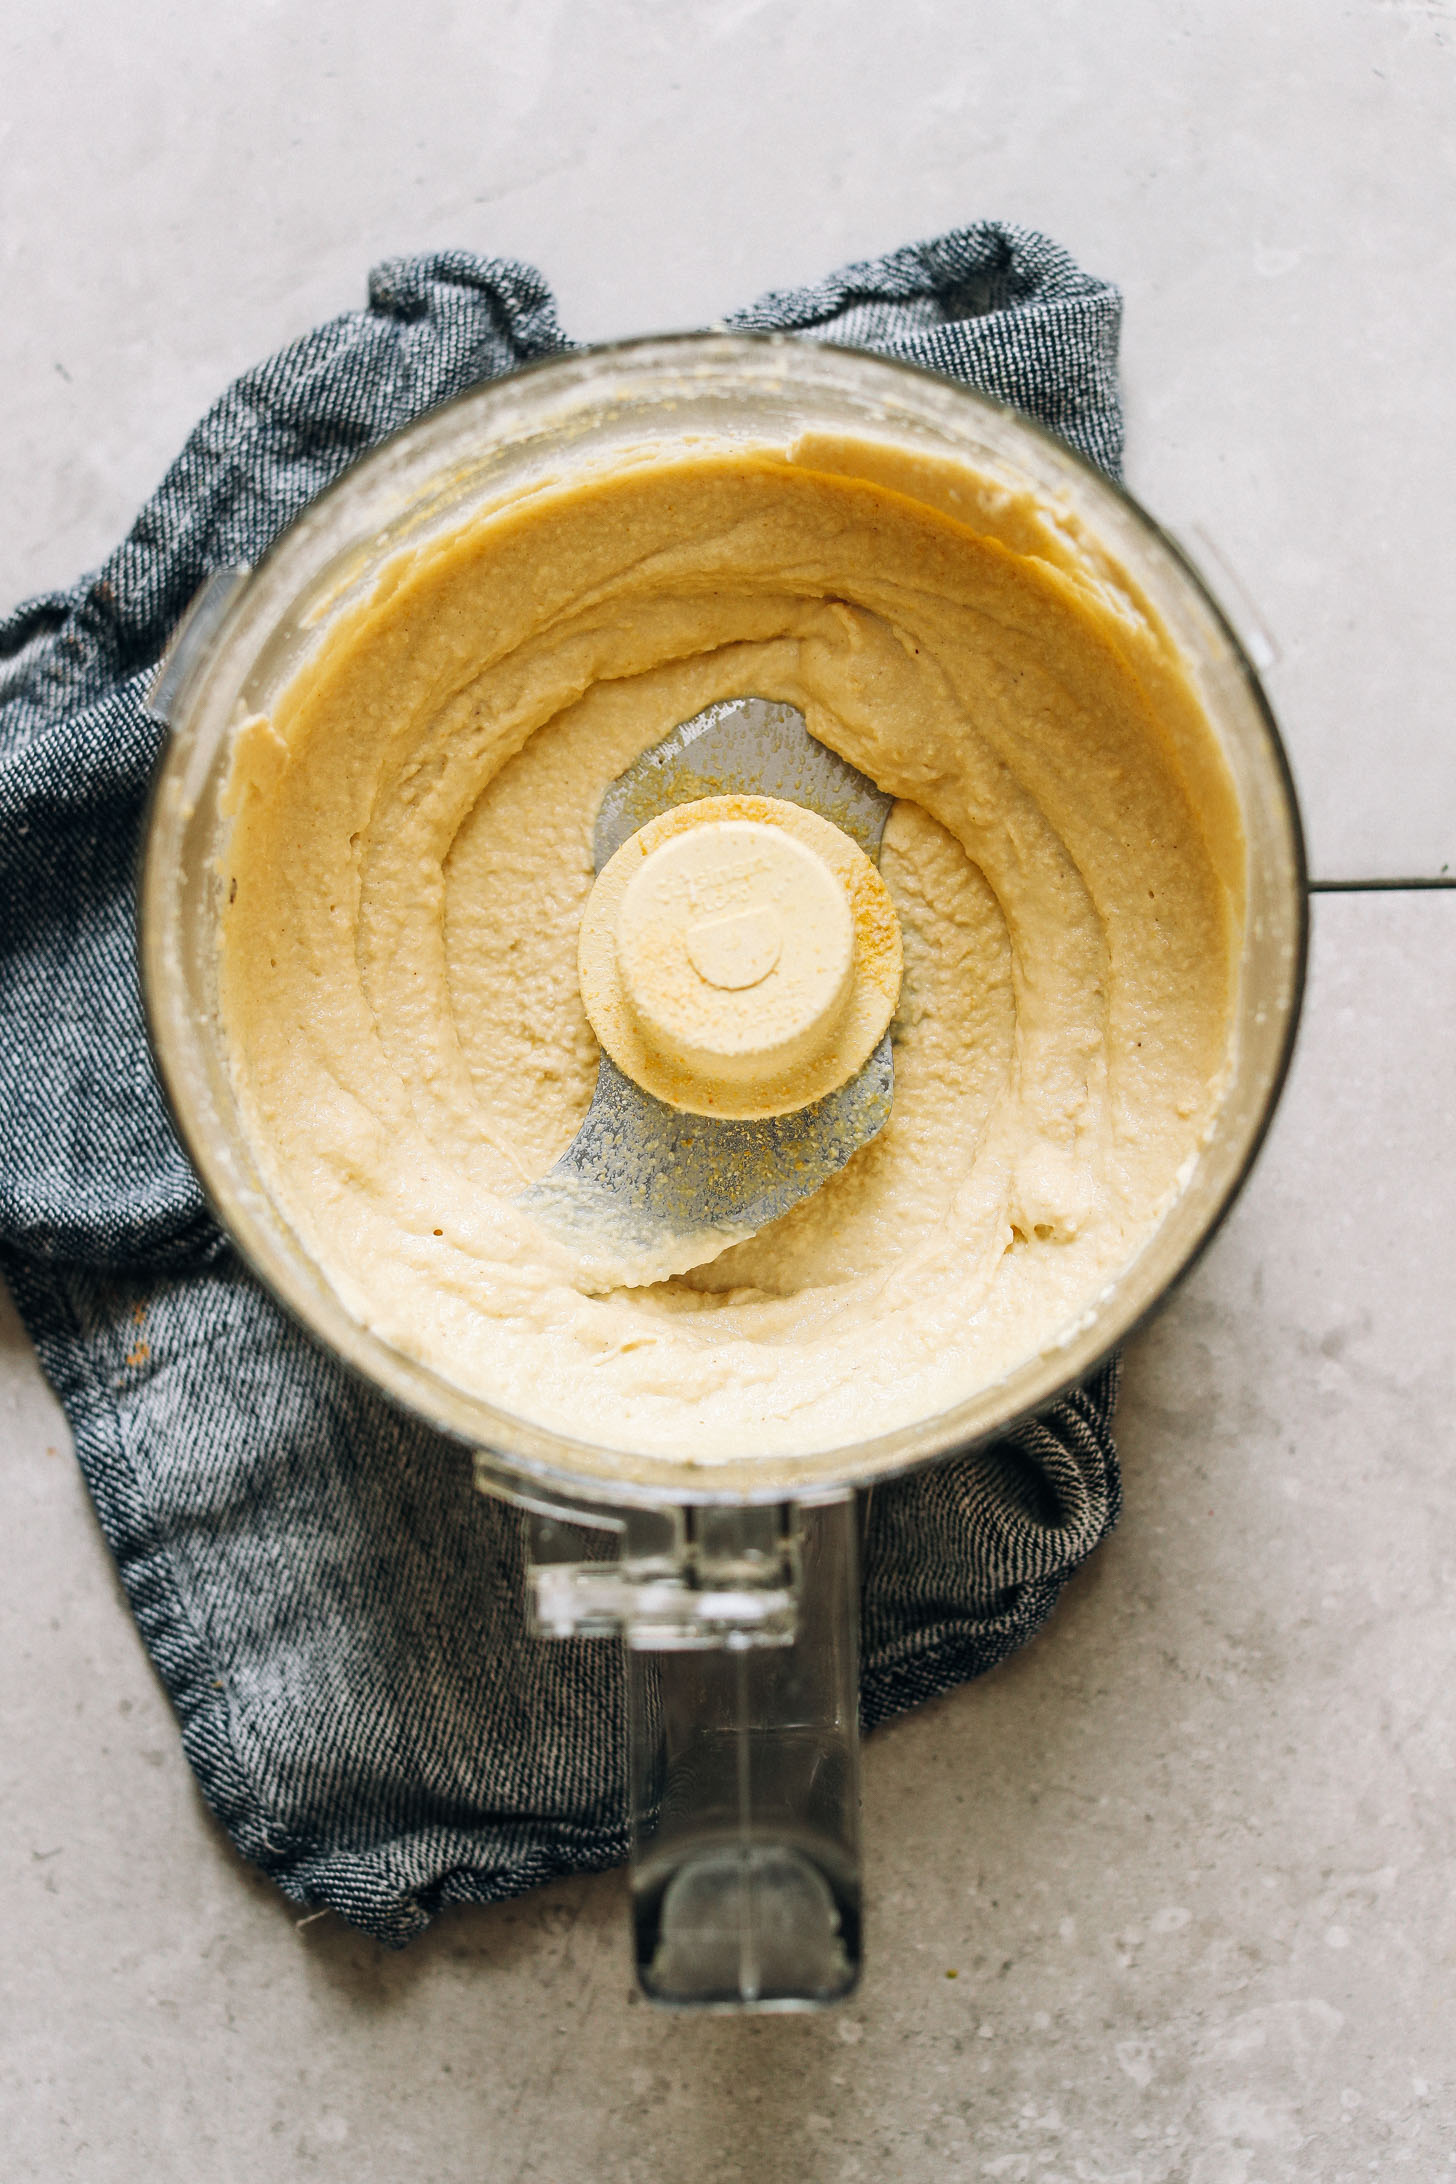 Food processor with vegan cheese sauce for adding to gluten-free spaghetti squash noodles